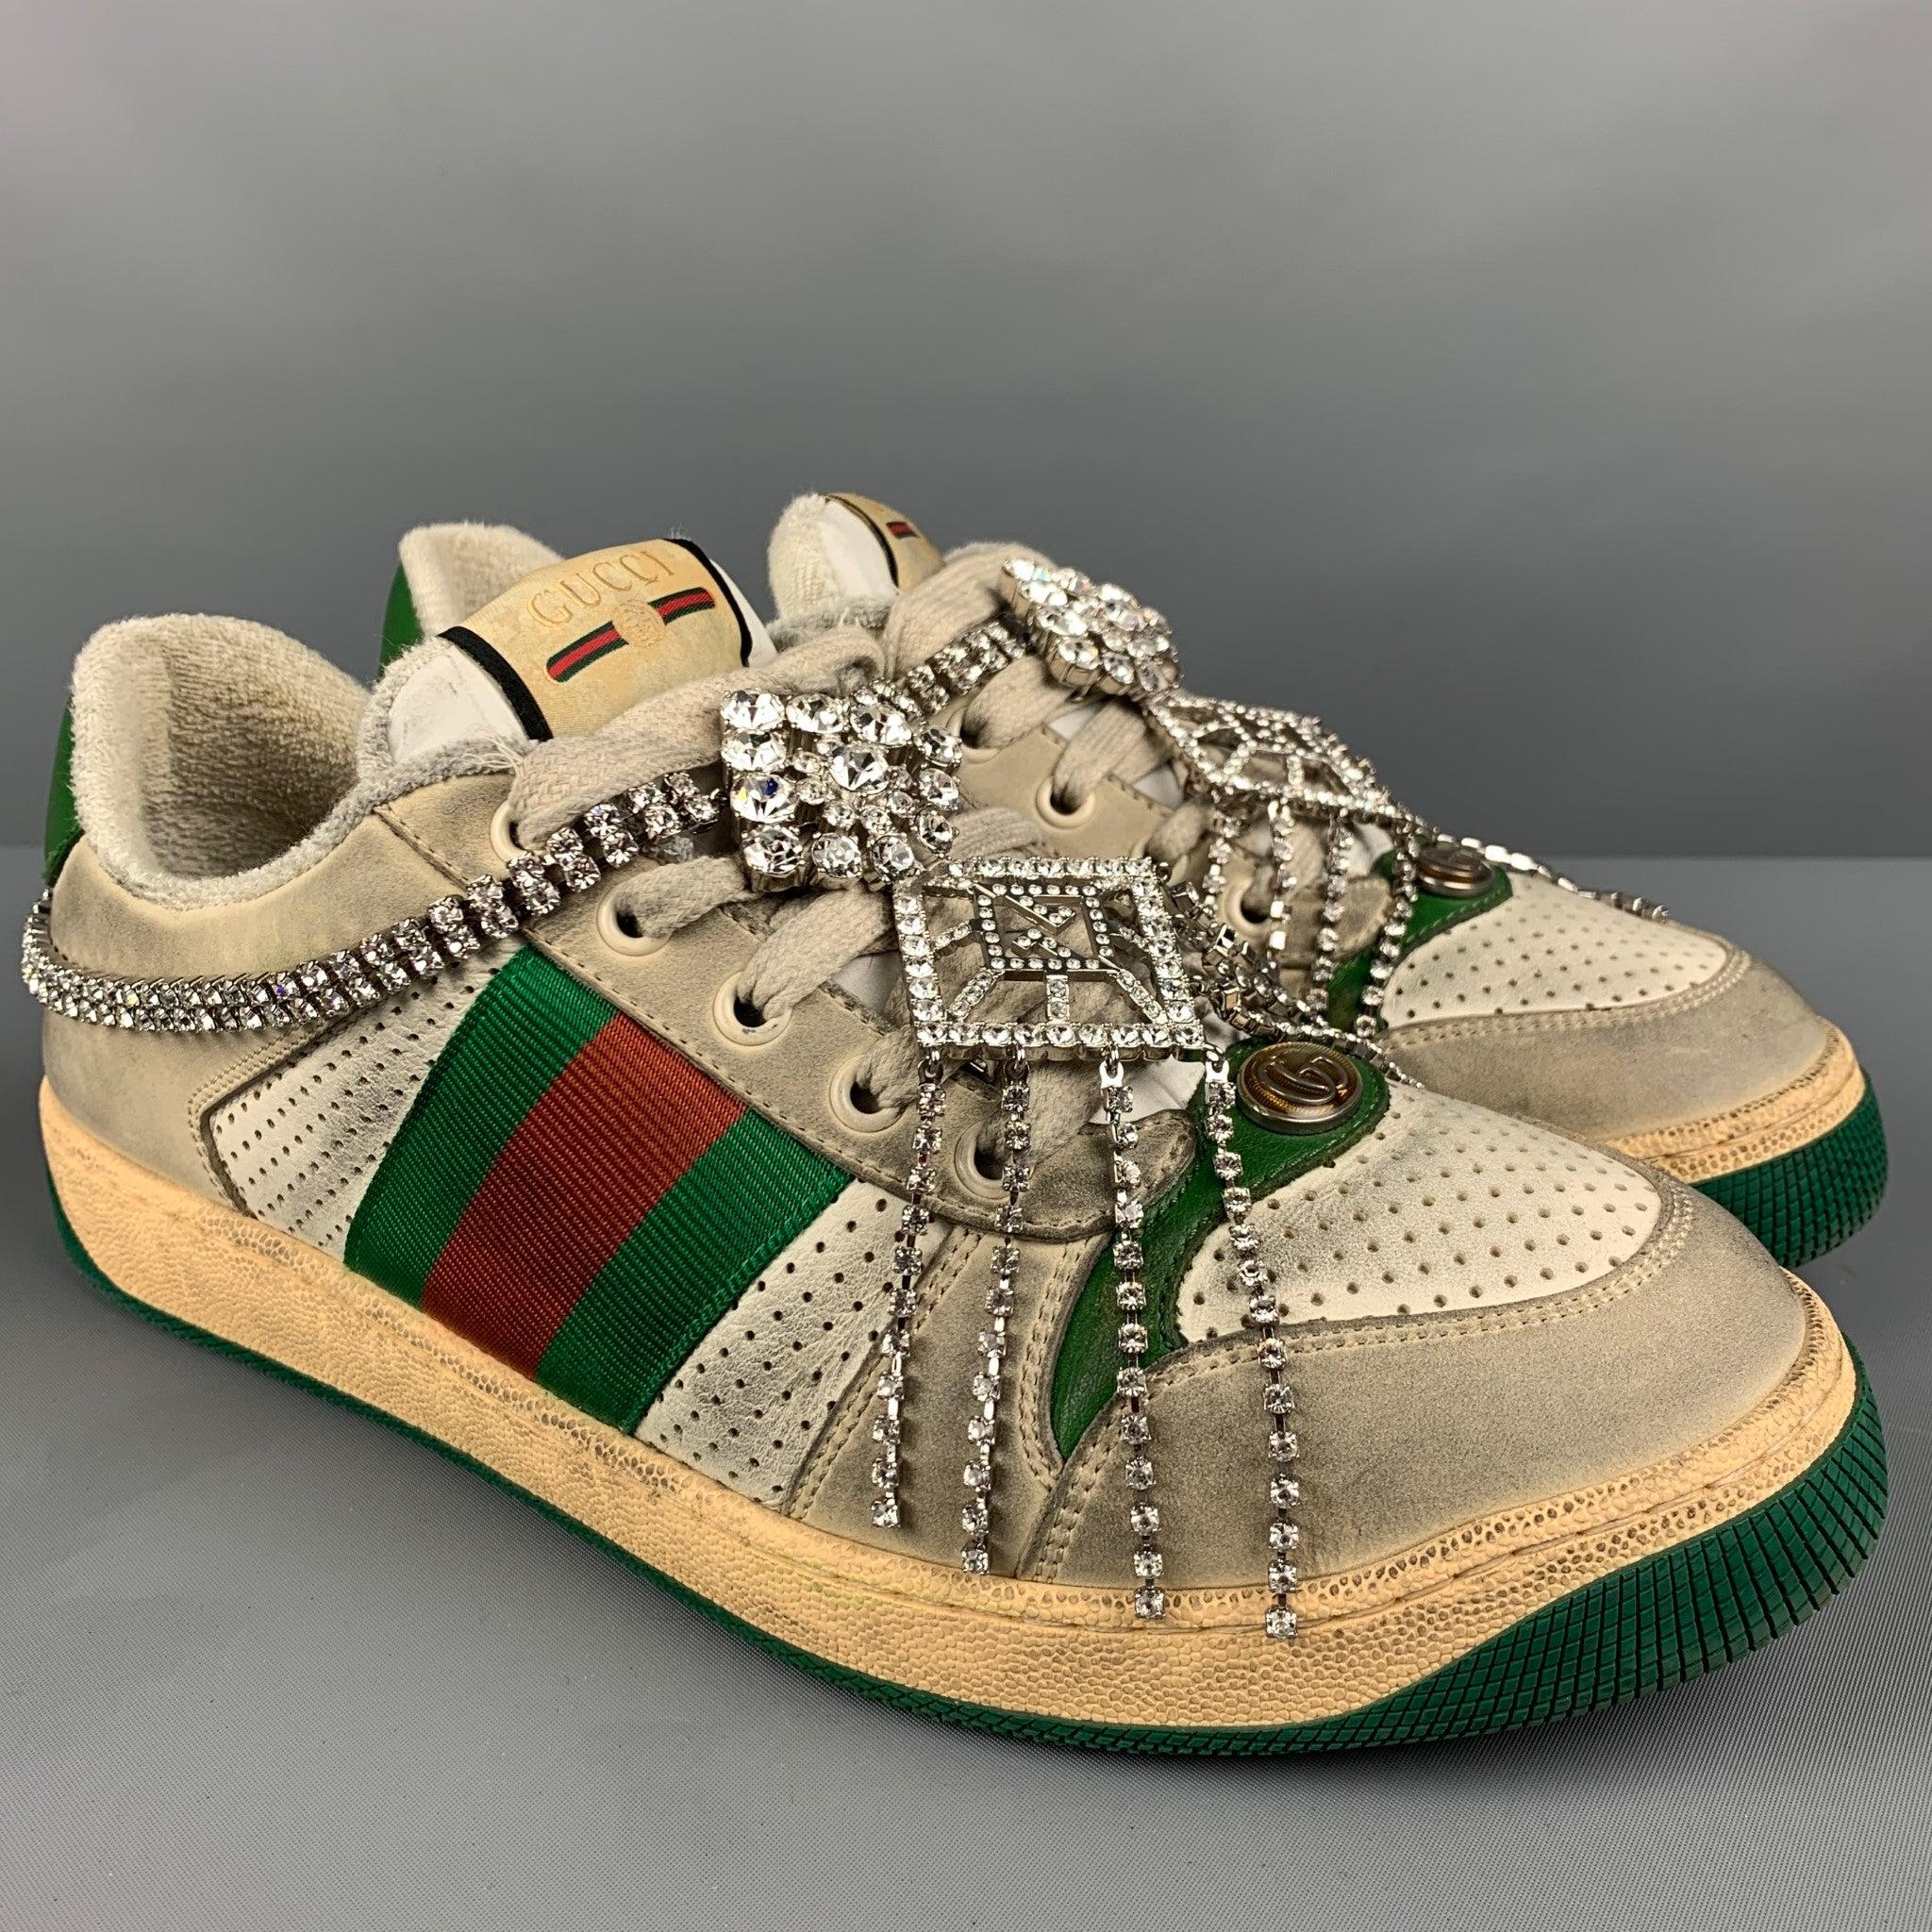 GUCCI 'Screener' sneakers in an off white distressed leather featuring a removable Art Deco GG crystal chain, web stripe detail, perforated, rubber sole, and a lace up closure. Comes with box. Made in Italy. Very Good Pre-Owned Condition.  

Marked: